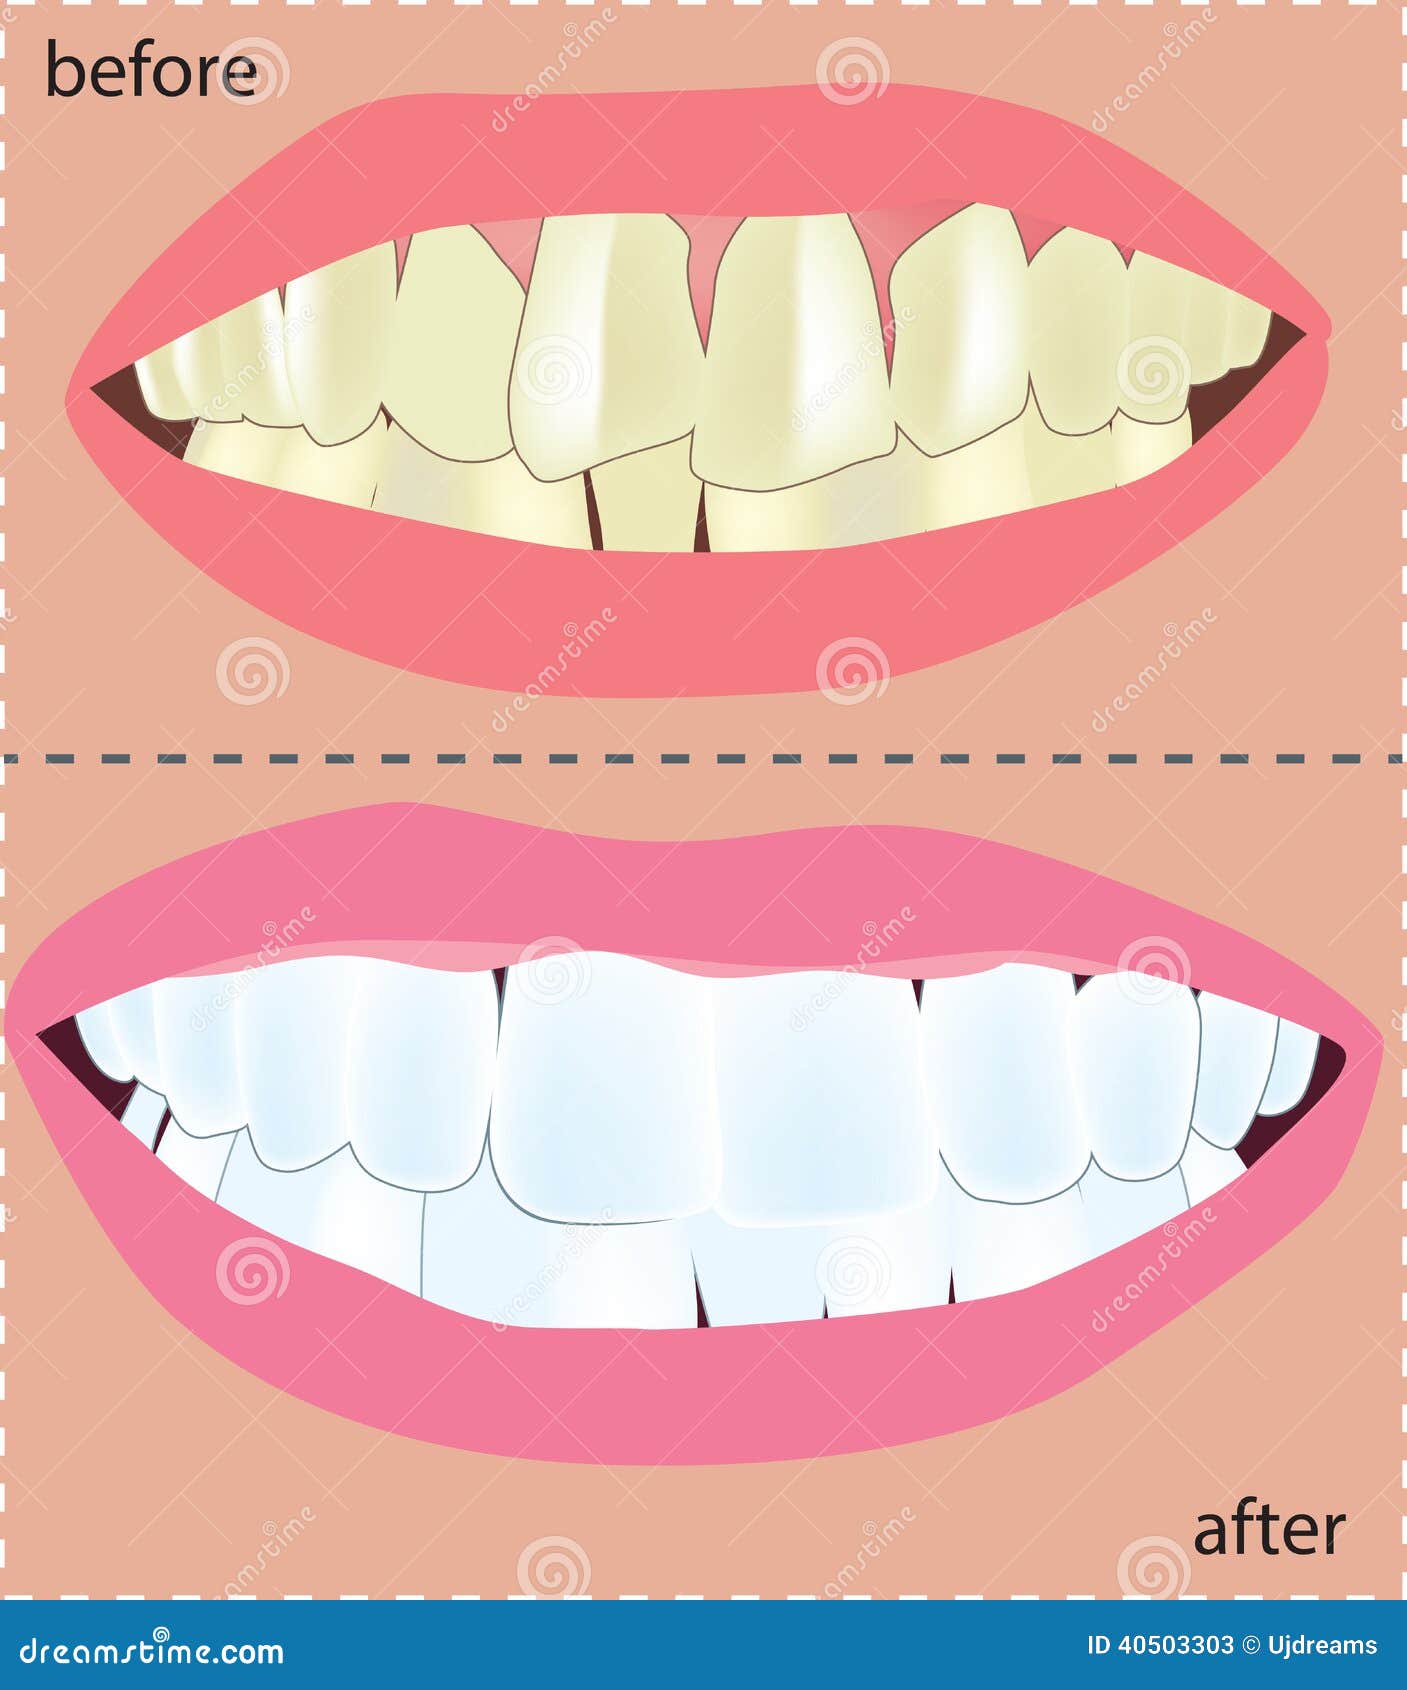 Cosmetic Dentistry. Medical color illustration.